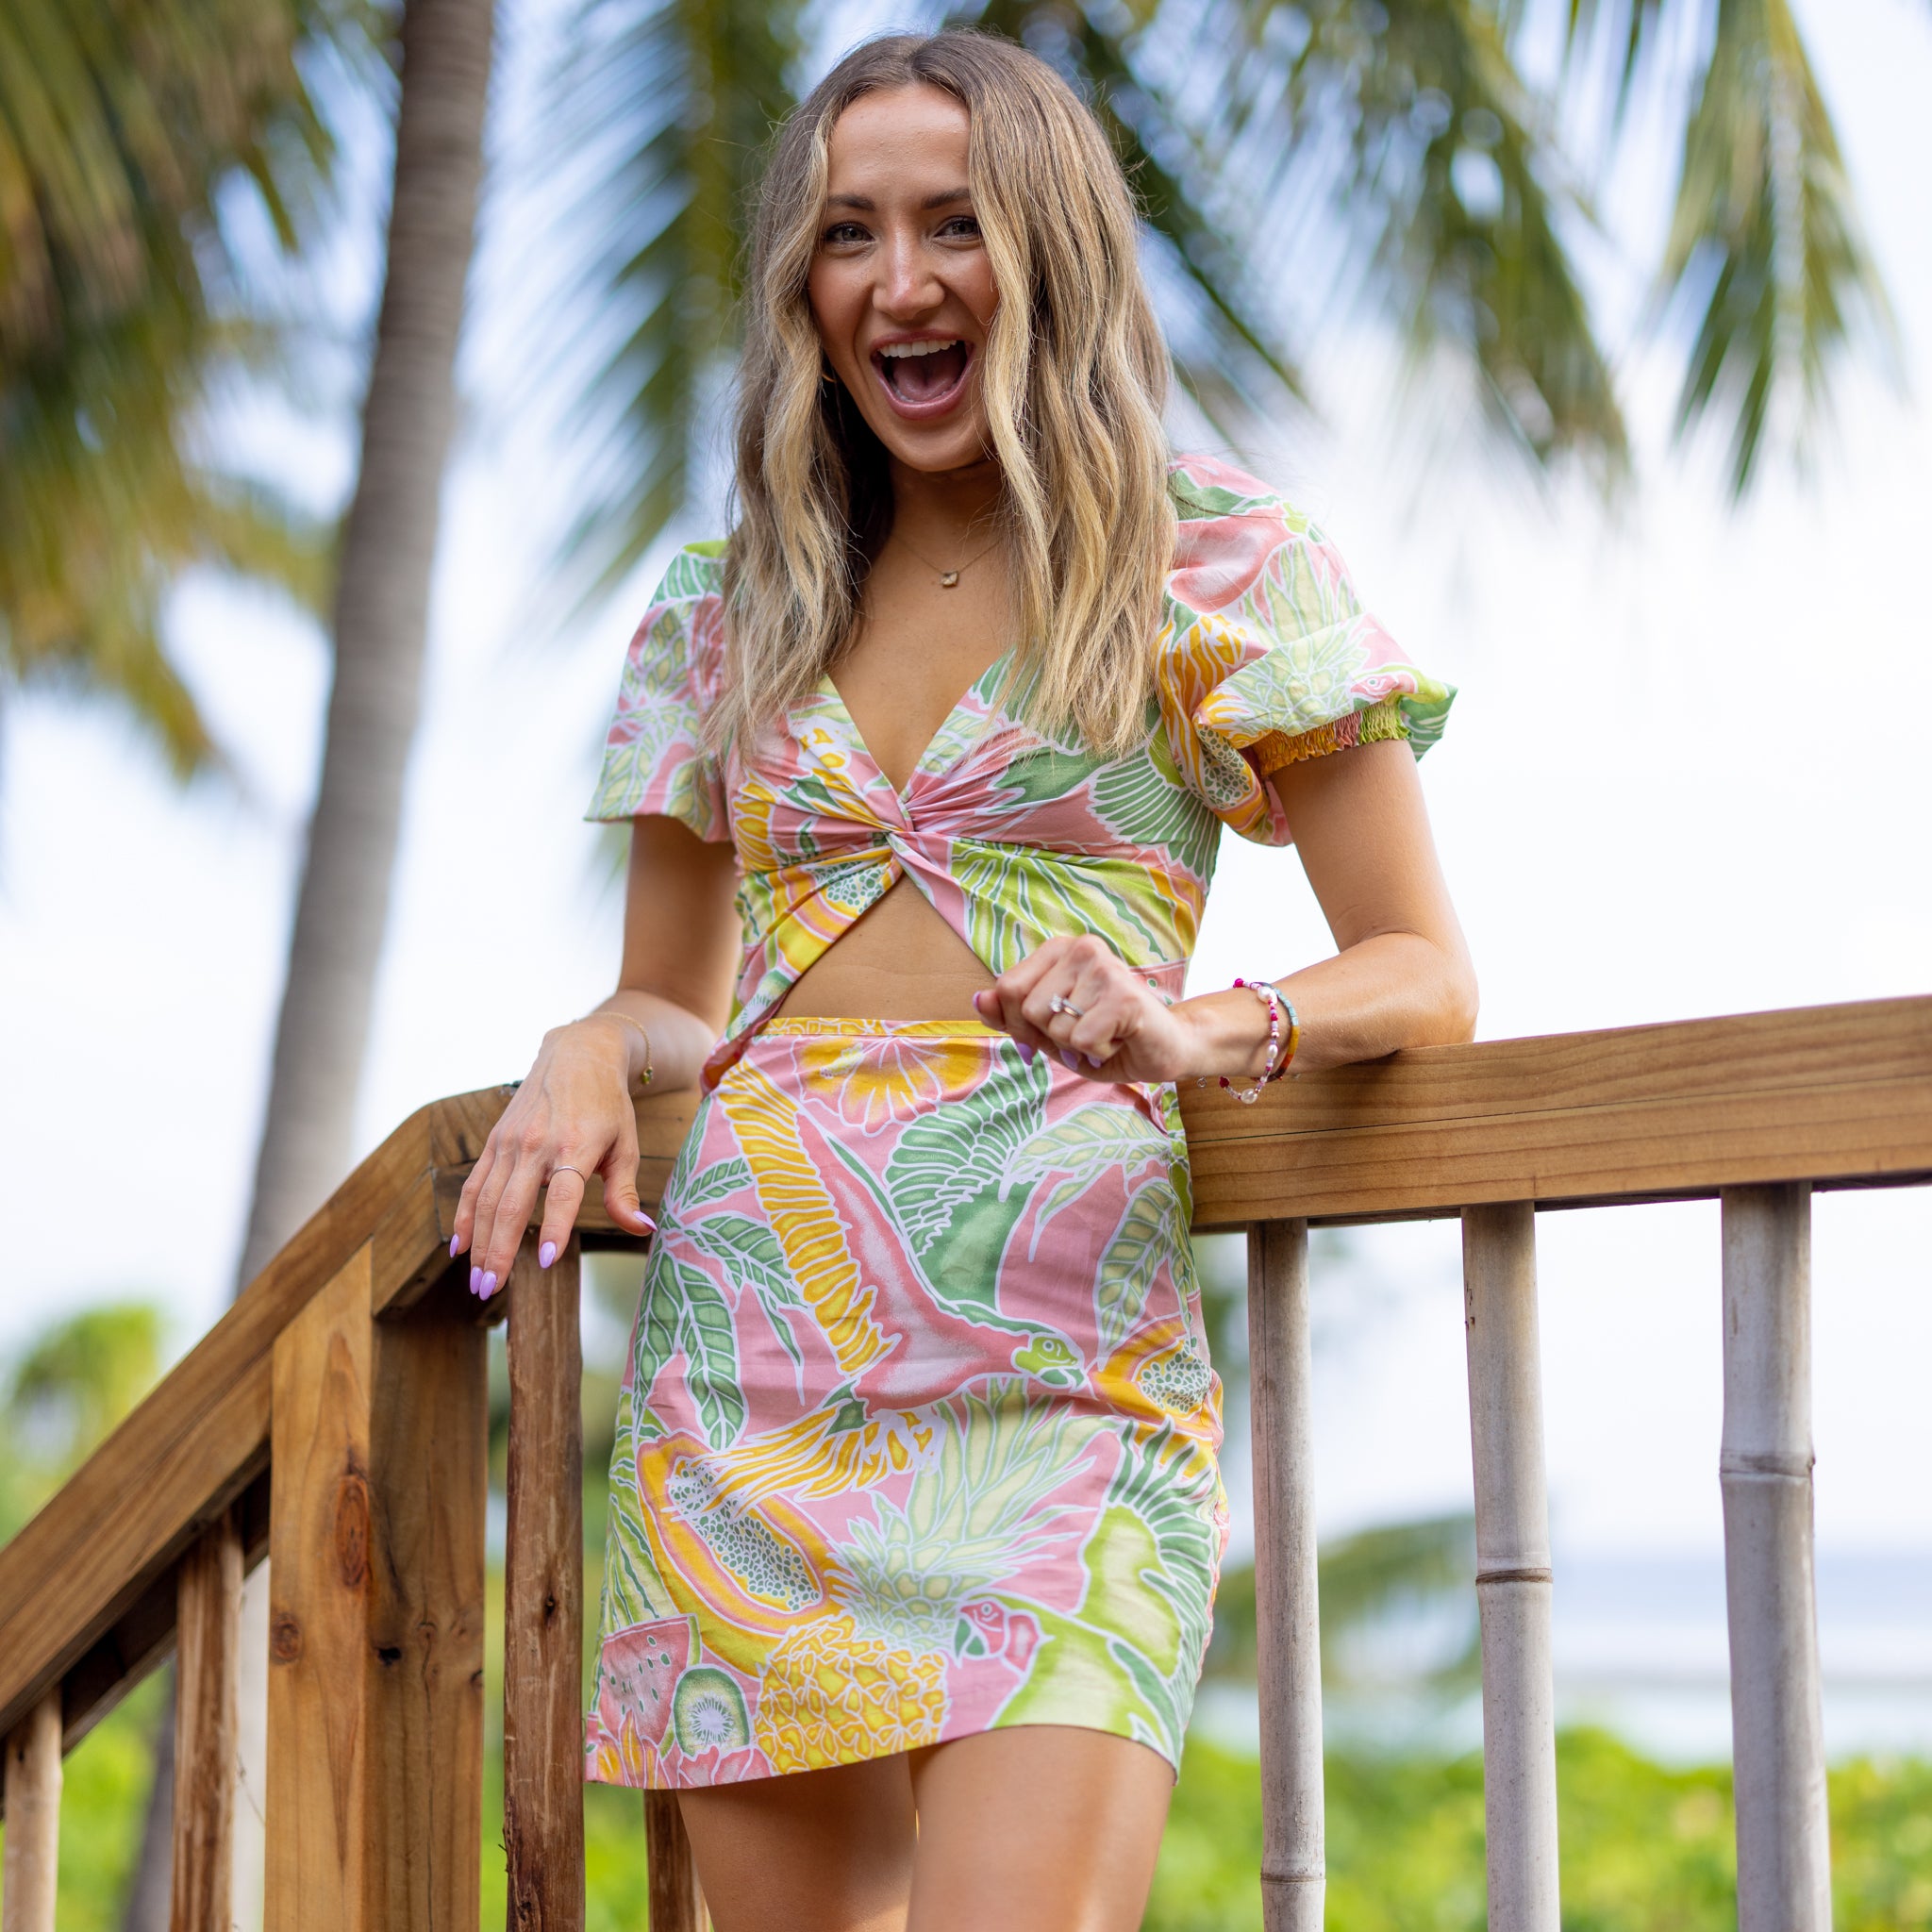 The Oia - Beach Dress | Tropical Vacation Dresses by Kenny Flowers Blue / XS